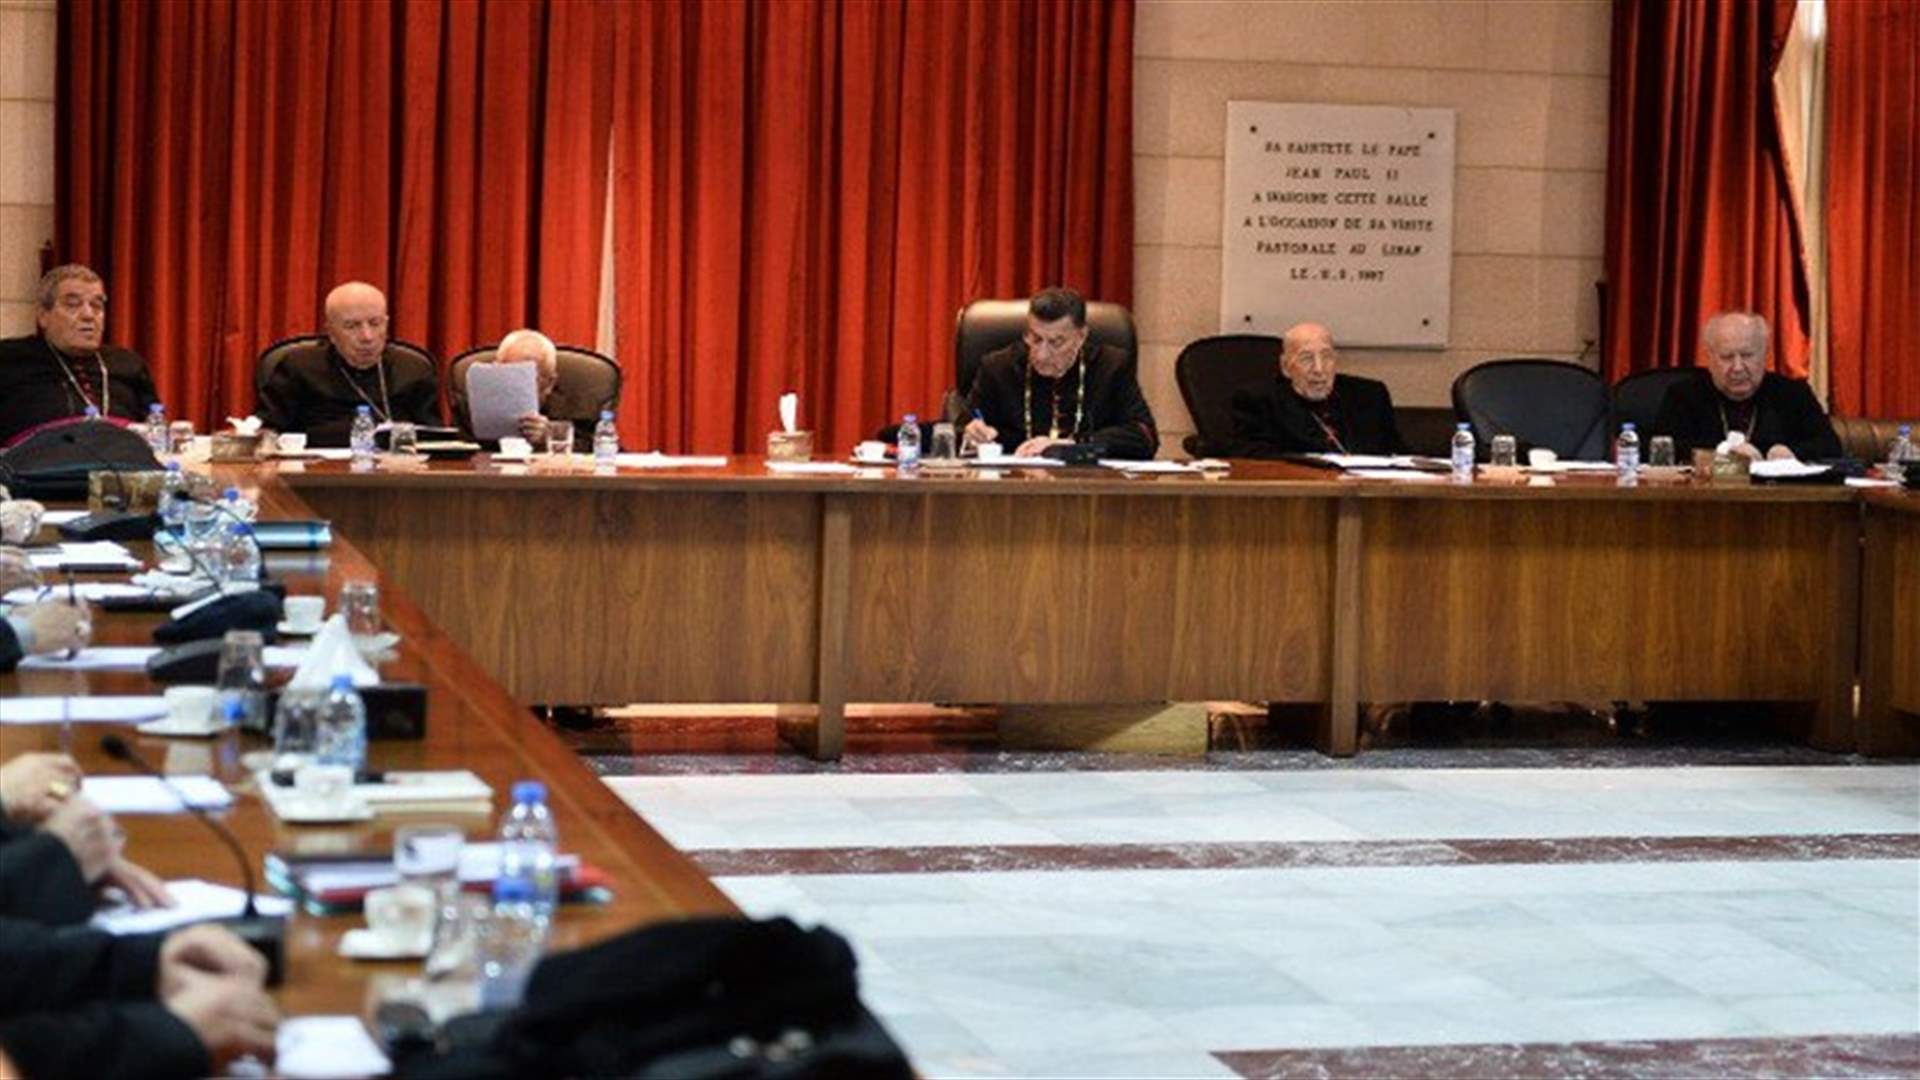 Maronite bishops call for drafting a “fair vote law,” addressing corruption